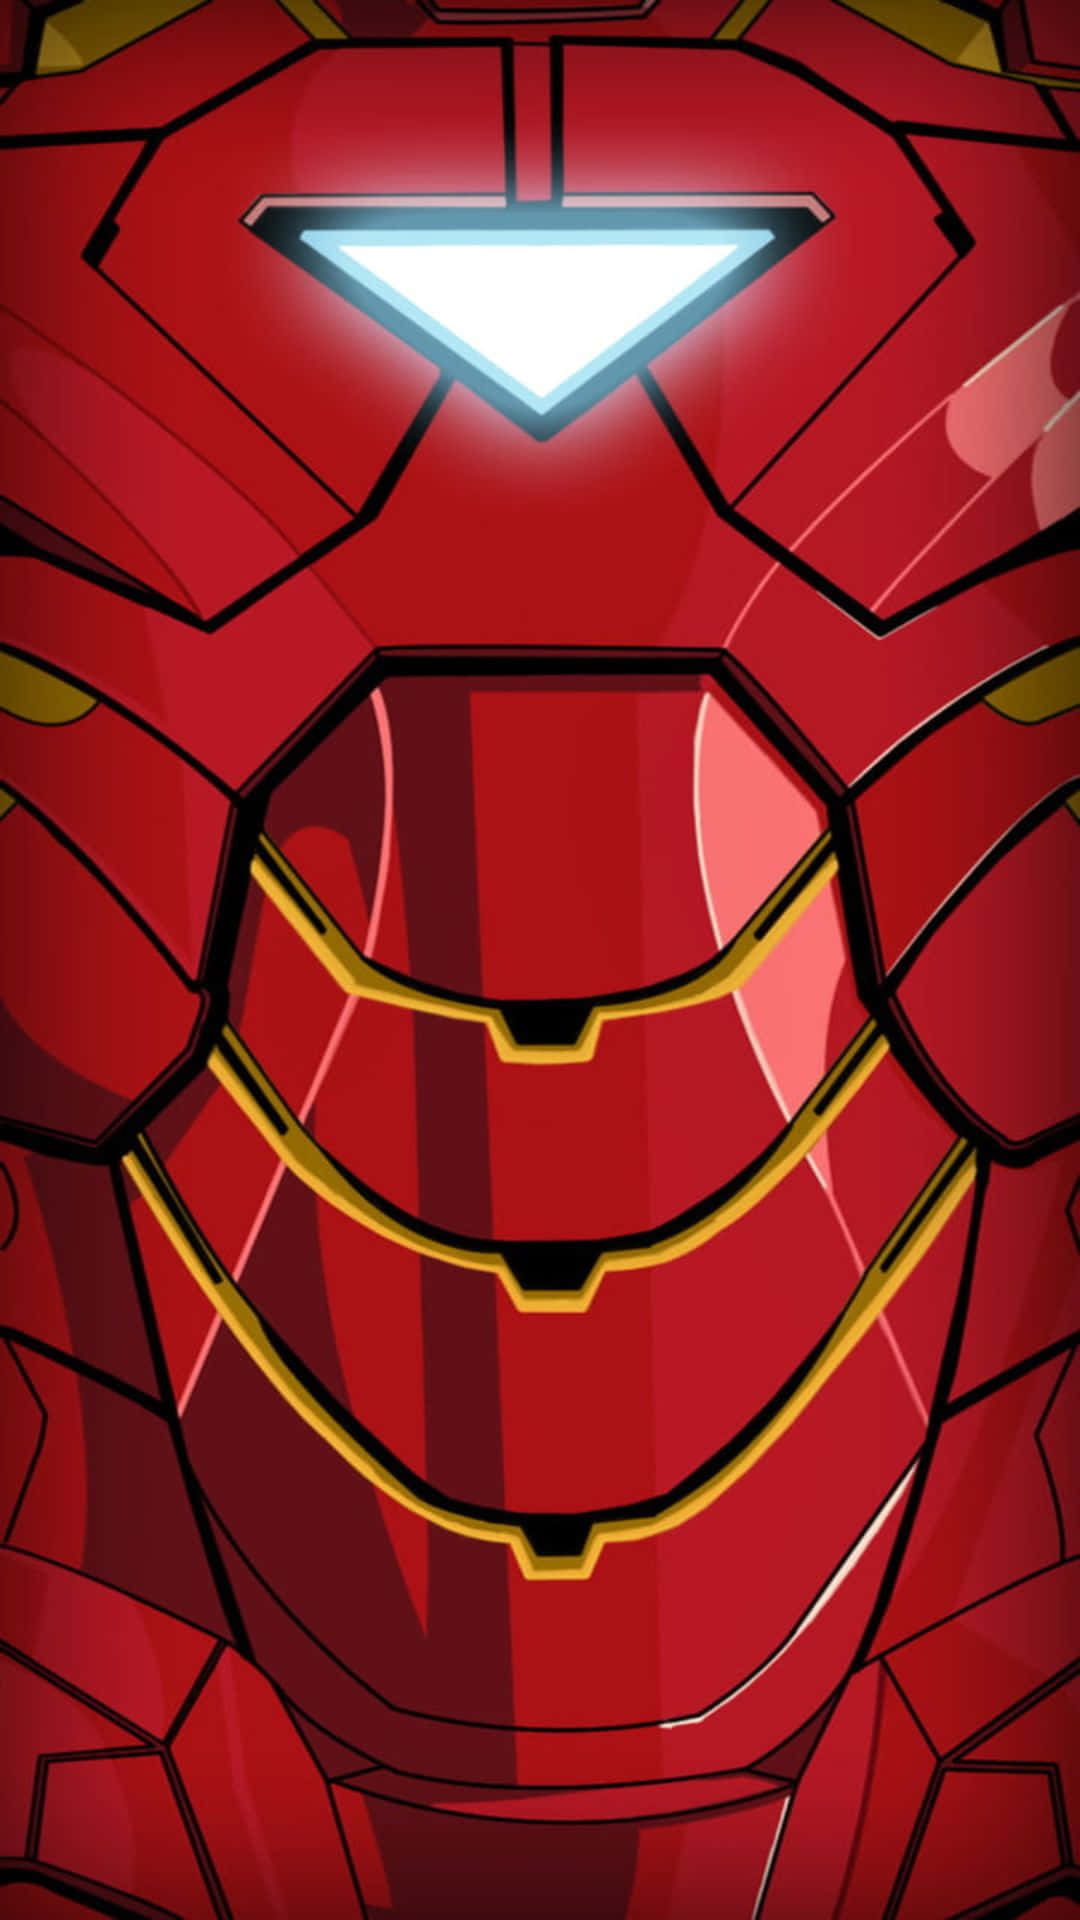 Take the Android experience to the next level with Iron Man!